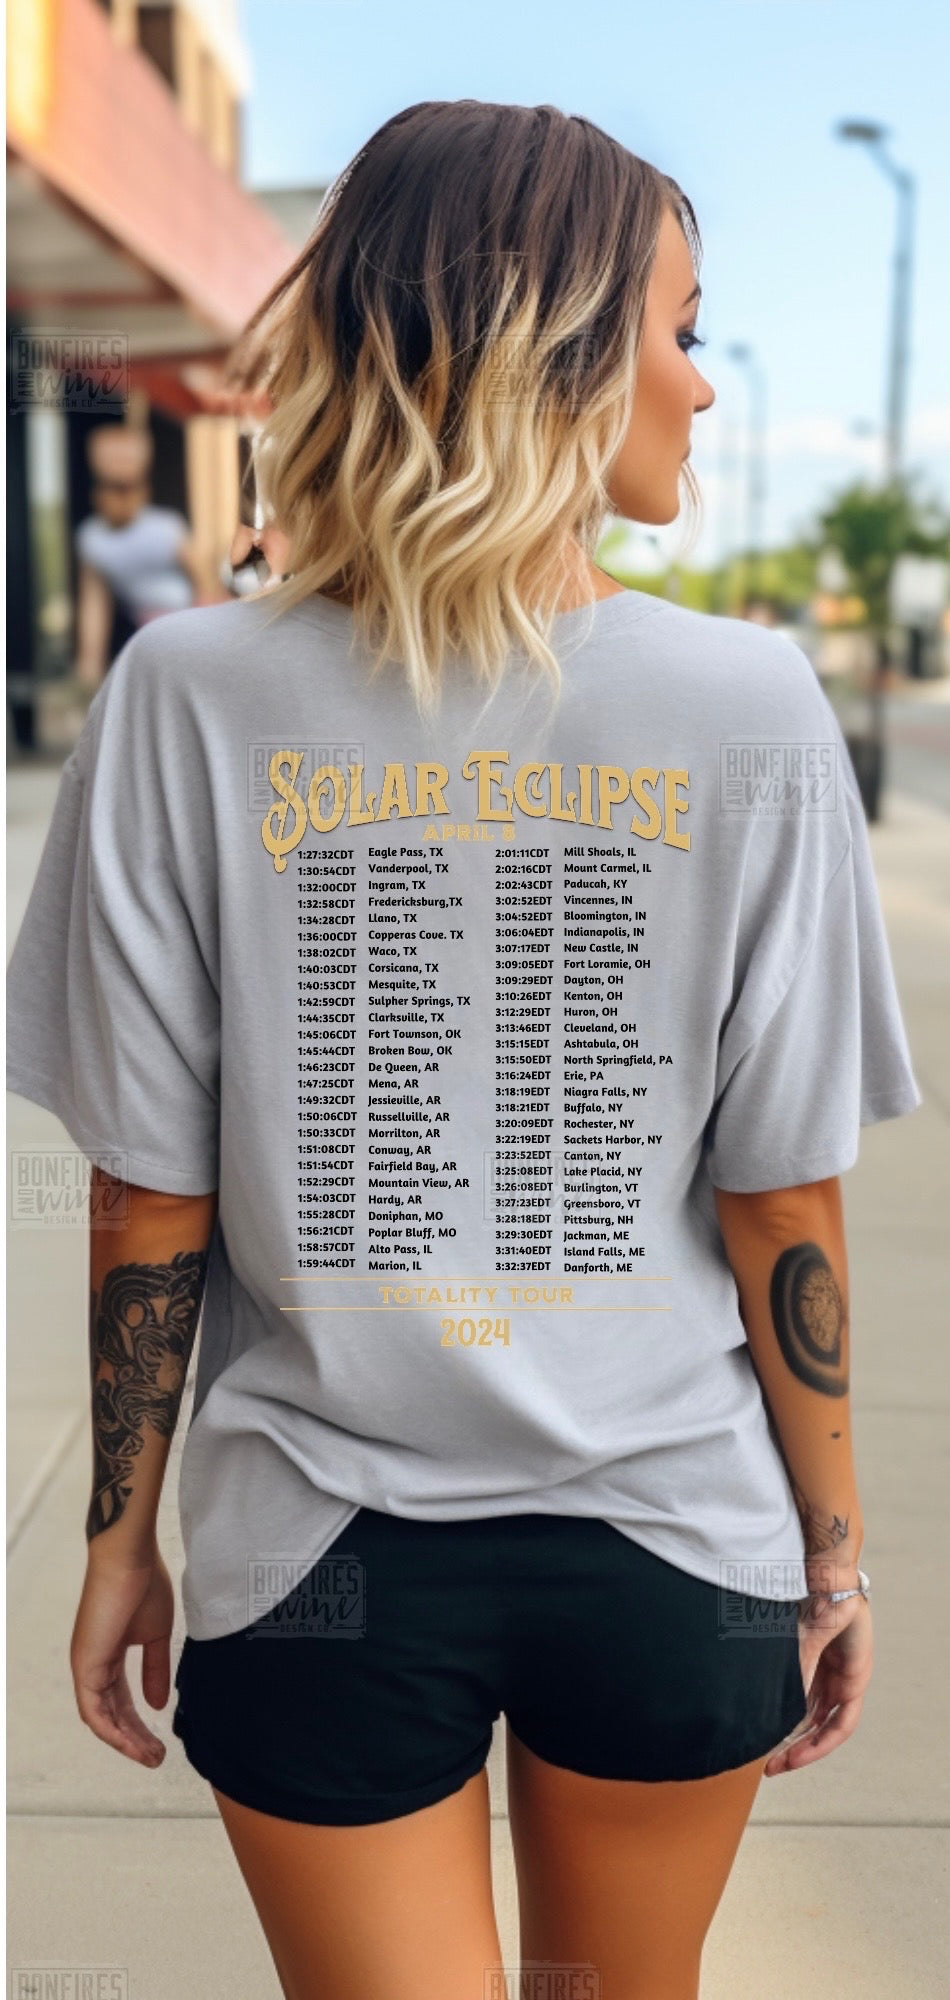 Solar Eclipse Tour - BACK OF SHIRT ADD ON!